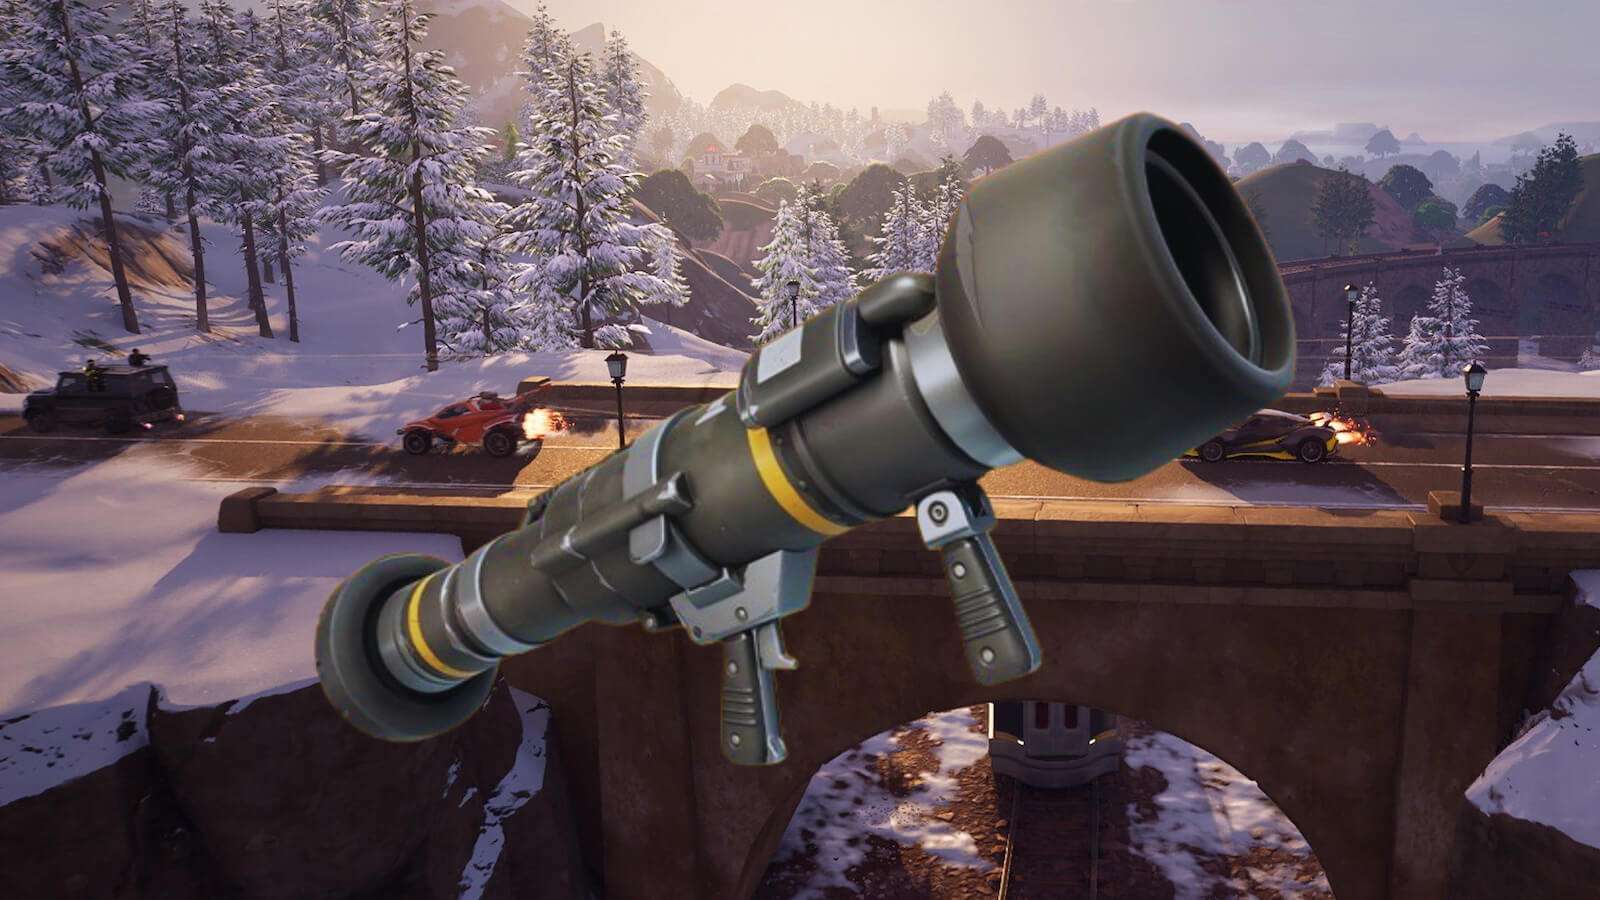 Where to find the Anvil Launcher in Fortnite